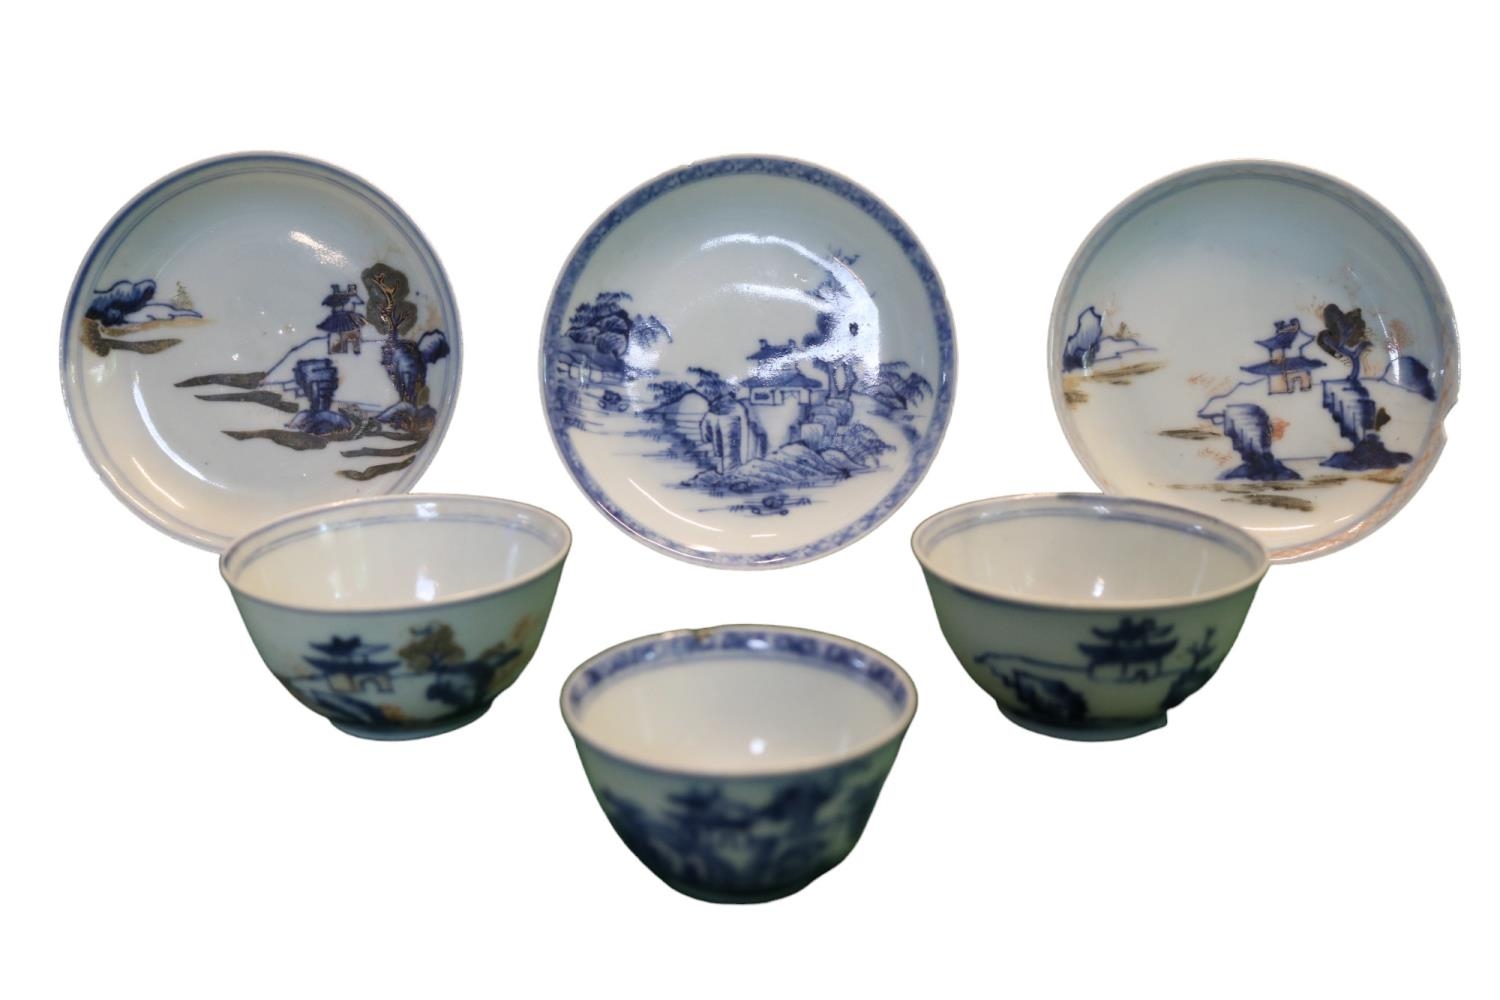 Collection of 18thC Nanking Cargo 1752 Tea bowls and Saucers recovered by Captain Michael Hatcher in